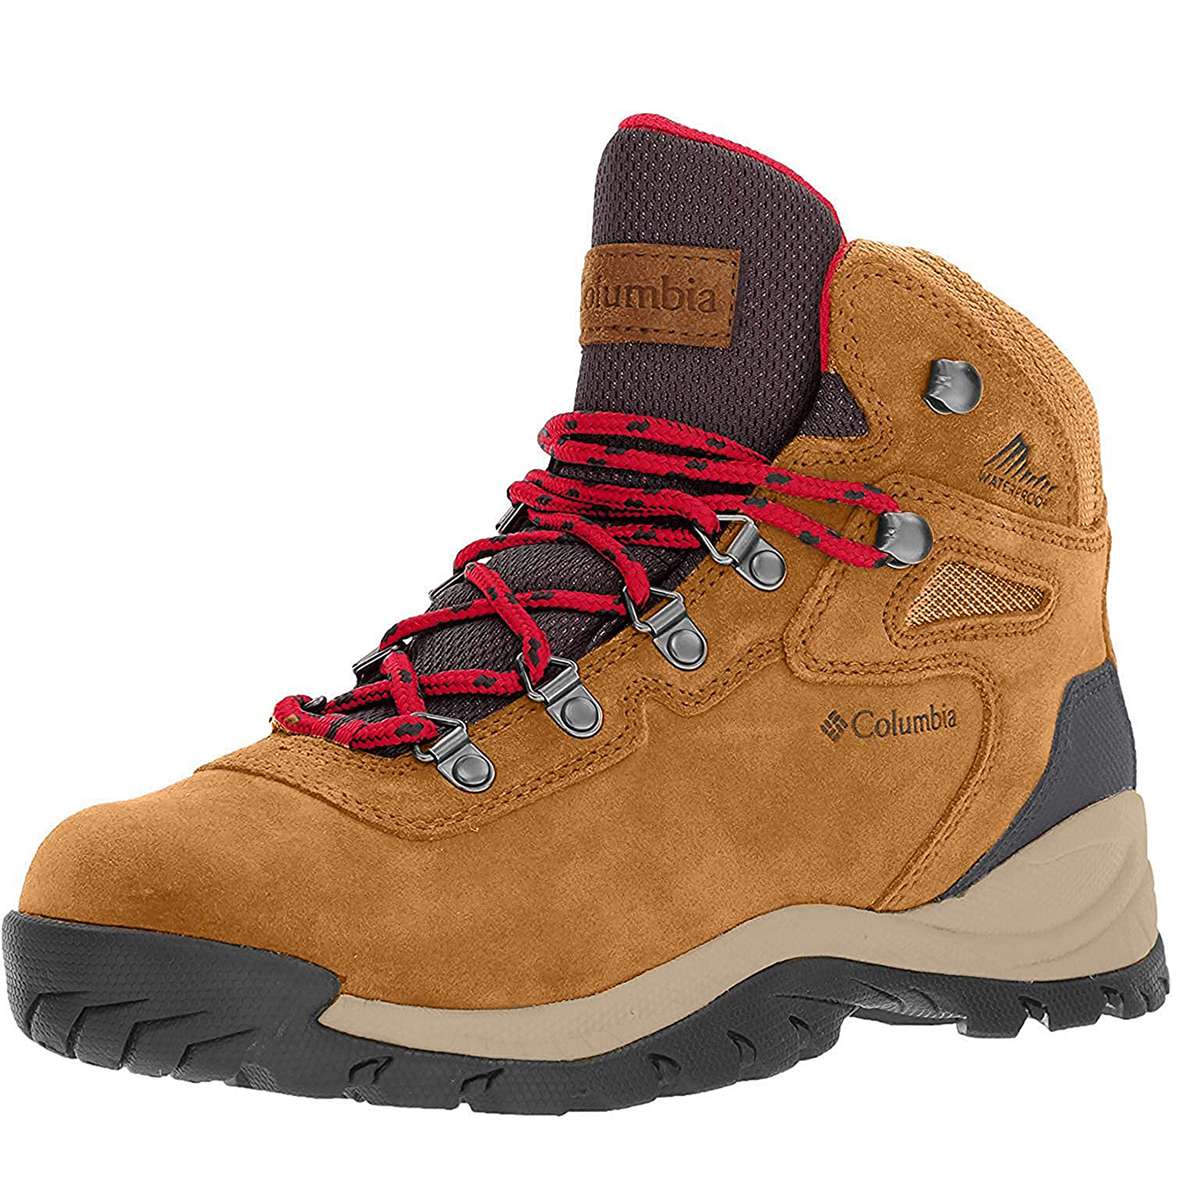 Amazon Shoppers Love Columbia’s Waterproof Hiking Boots | Travel + Leisure